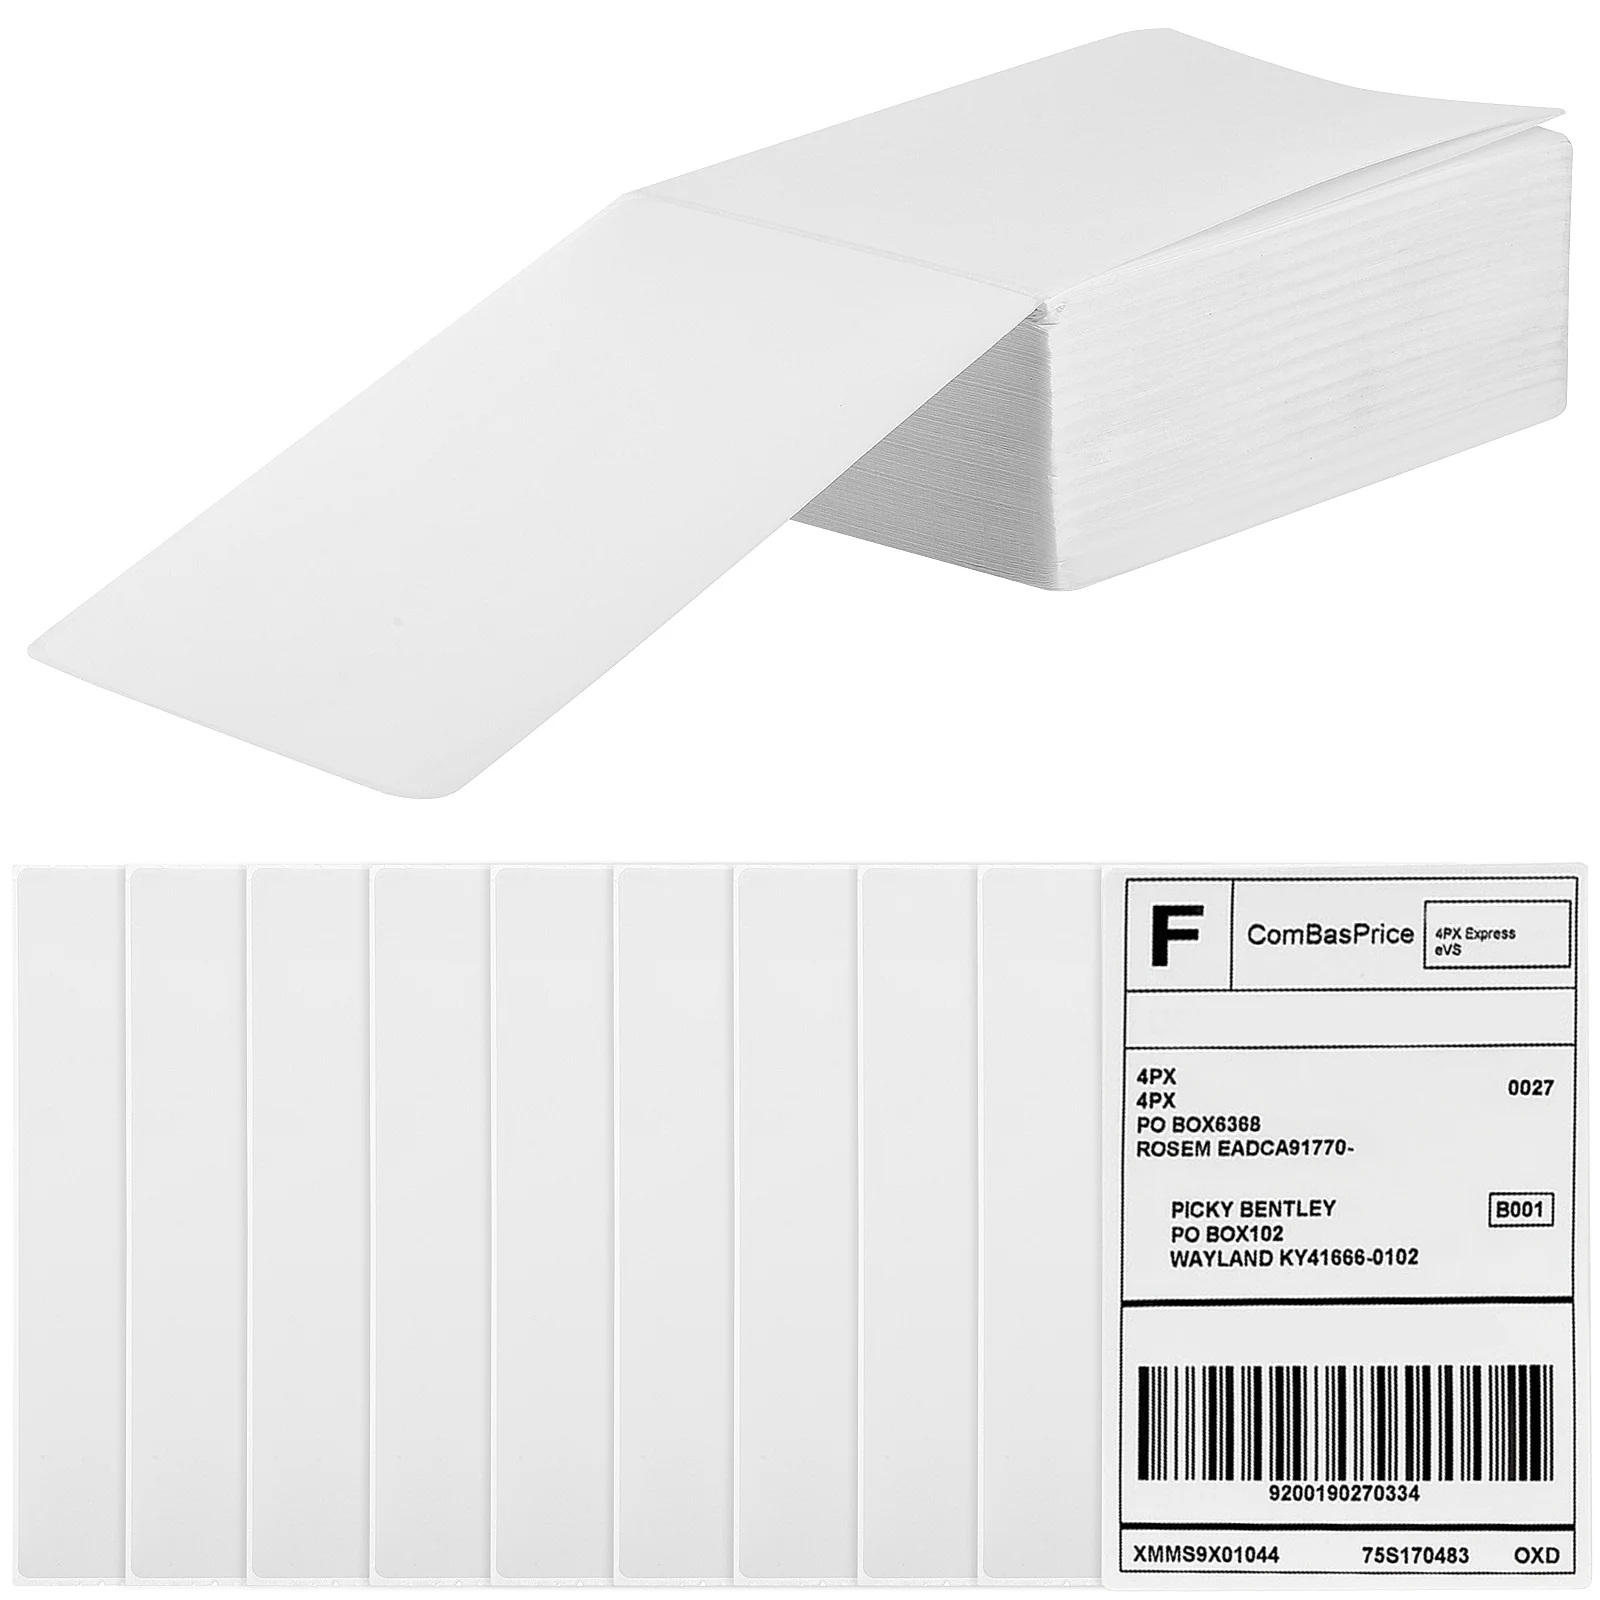 

500pcs Thermal Labels Self Adhesive Mailing Paper Labels Replacement with Perforated Line